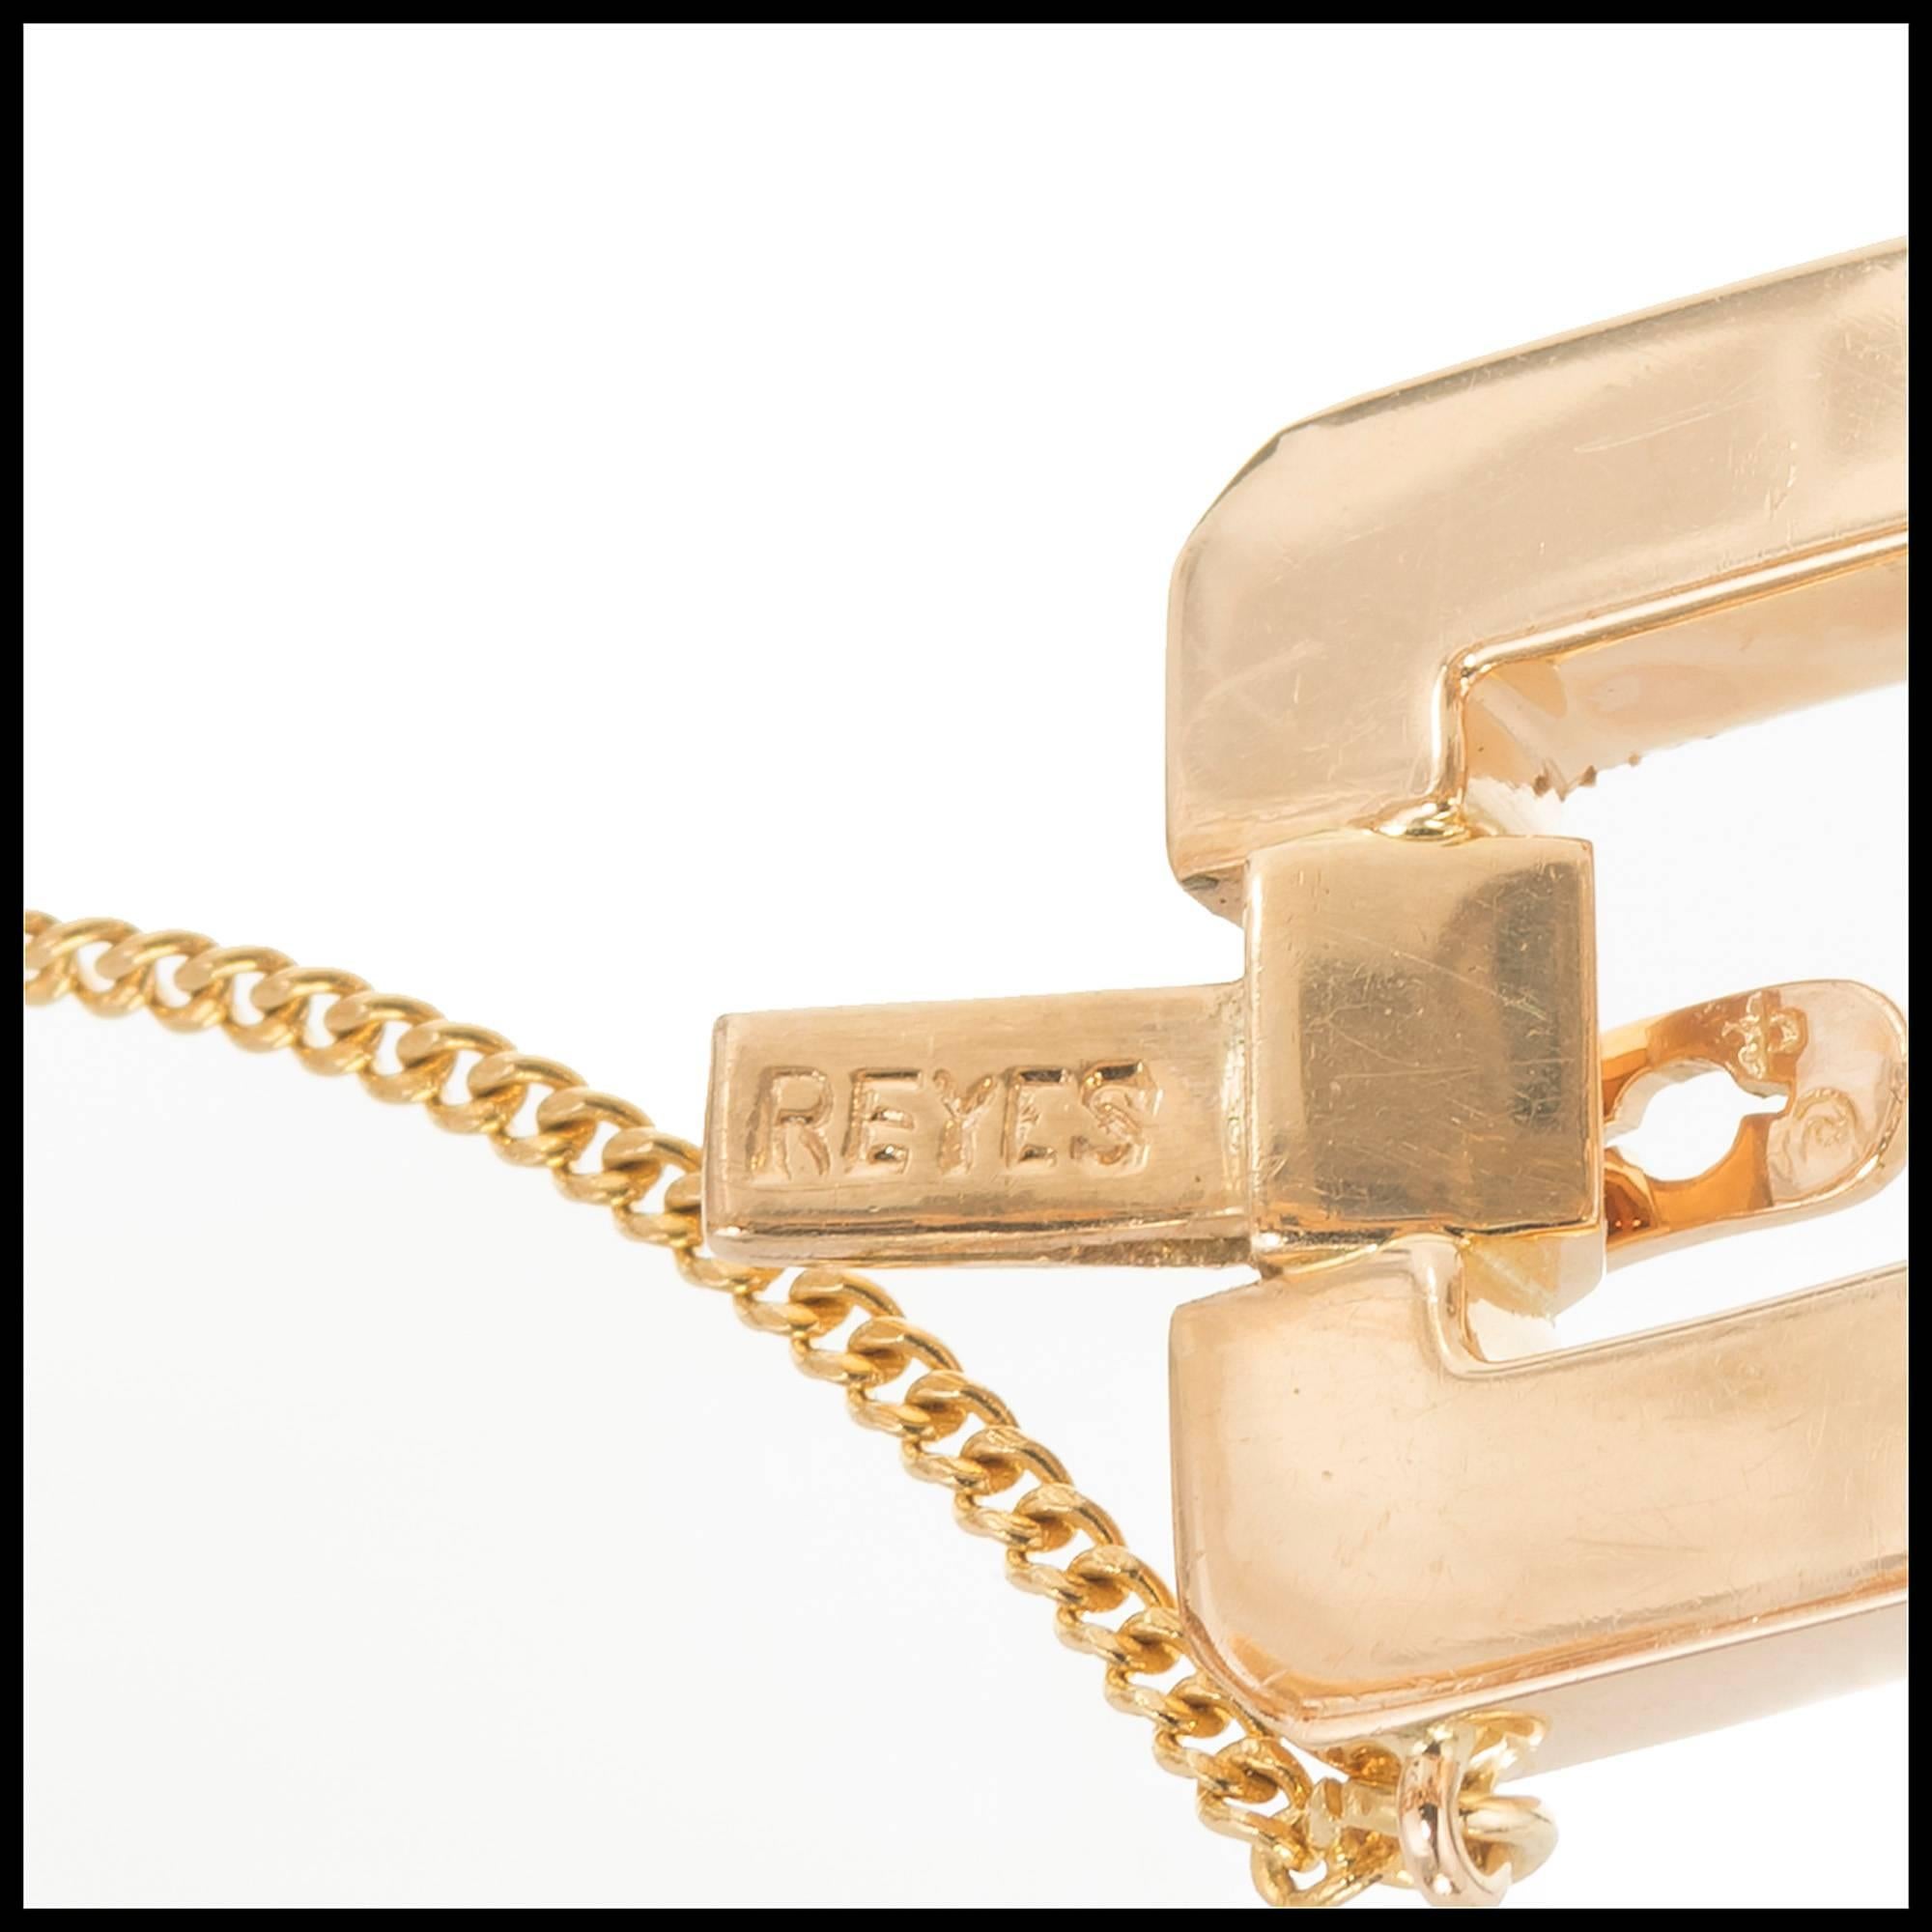 Retro 1940’s deep 18k rose gold hinged octagonal link bracelet with built in box catch, top side safety and safety chain.

18k rose gold
Length: 7.5 inches
Width at top: 19.1mm
Height at top: 3.94mm
Width at Bottom: 19.1mm
53.8 grams
Tested: